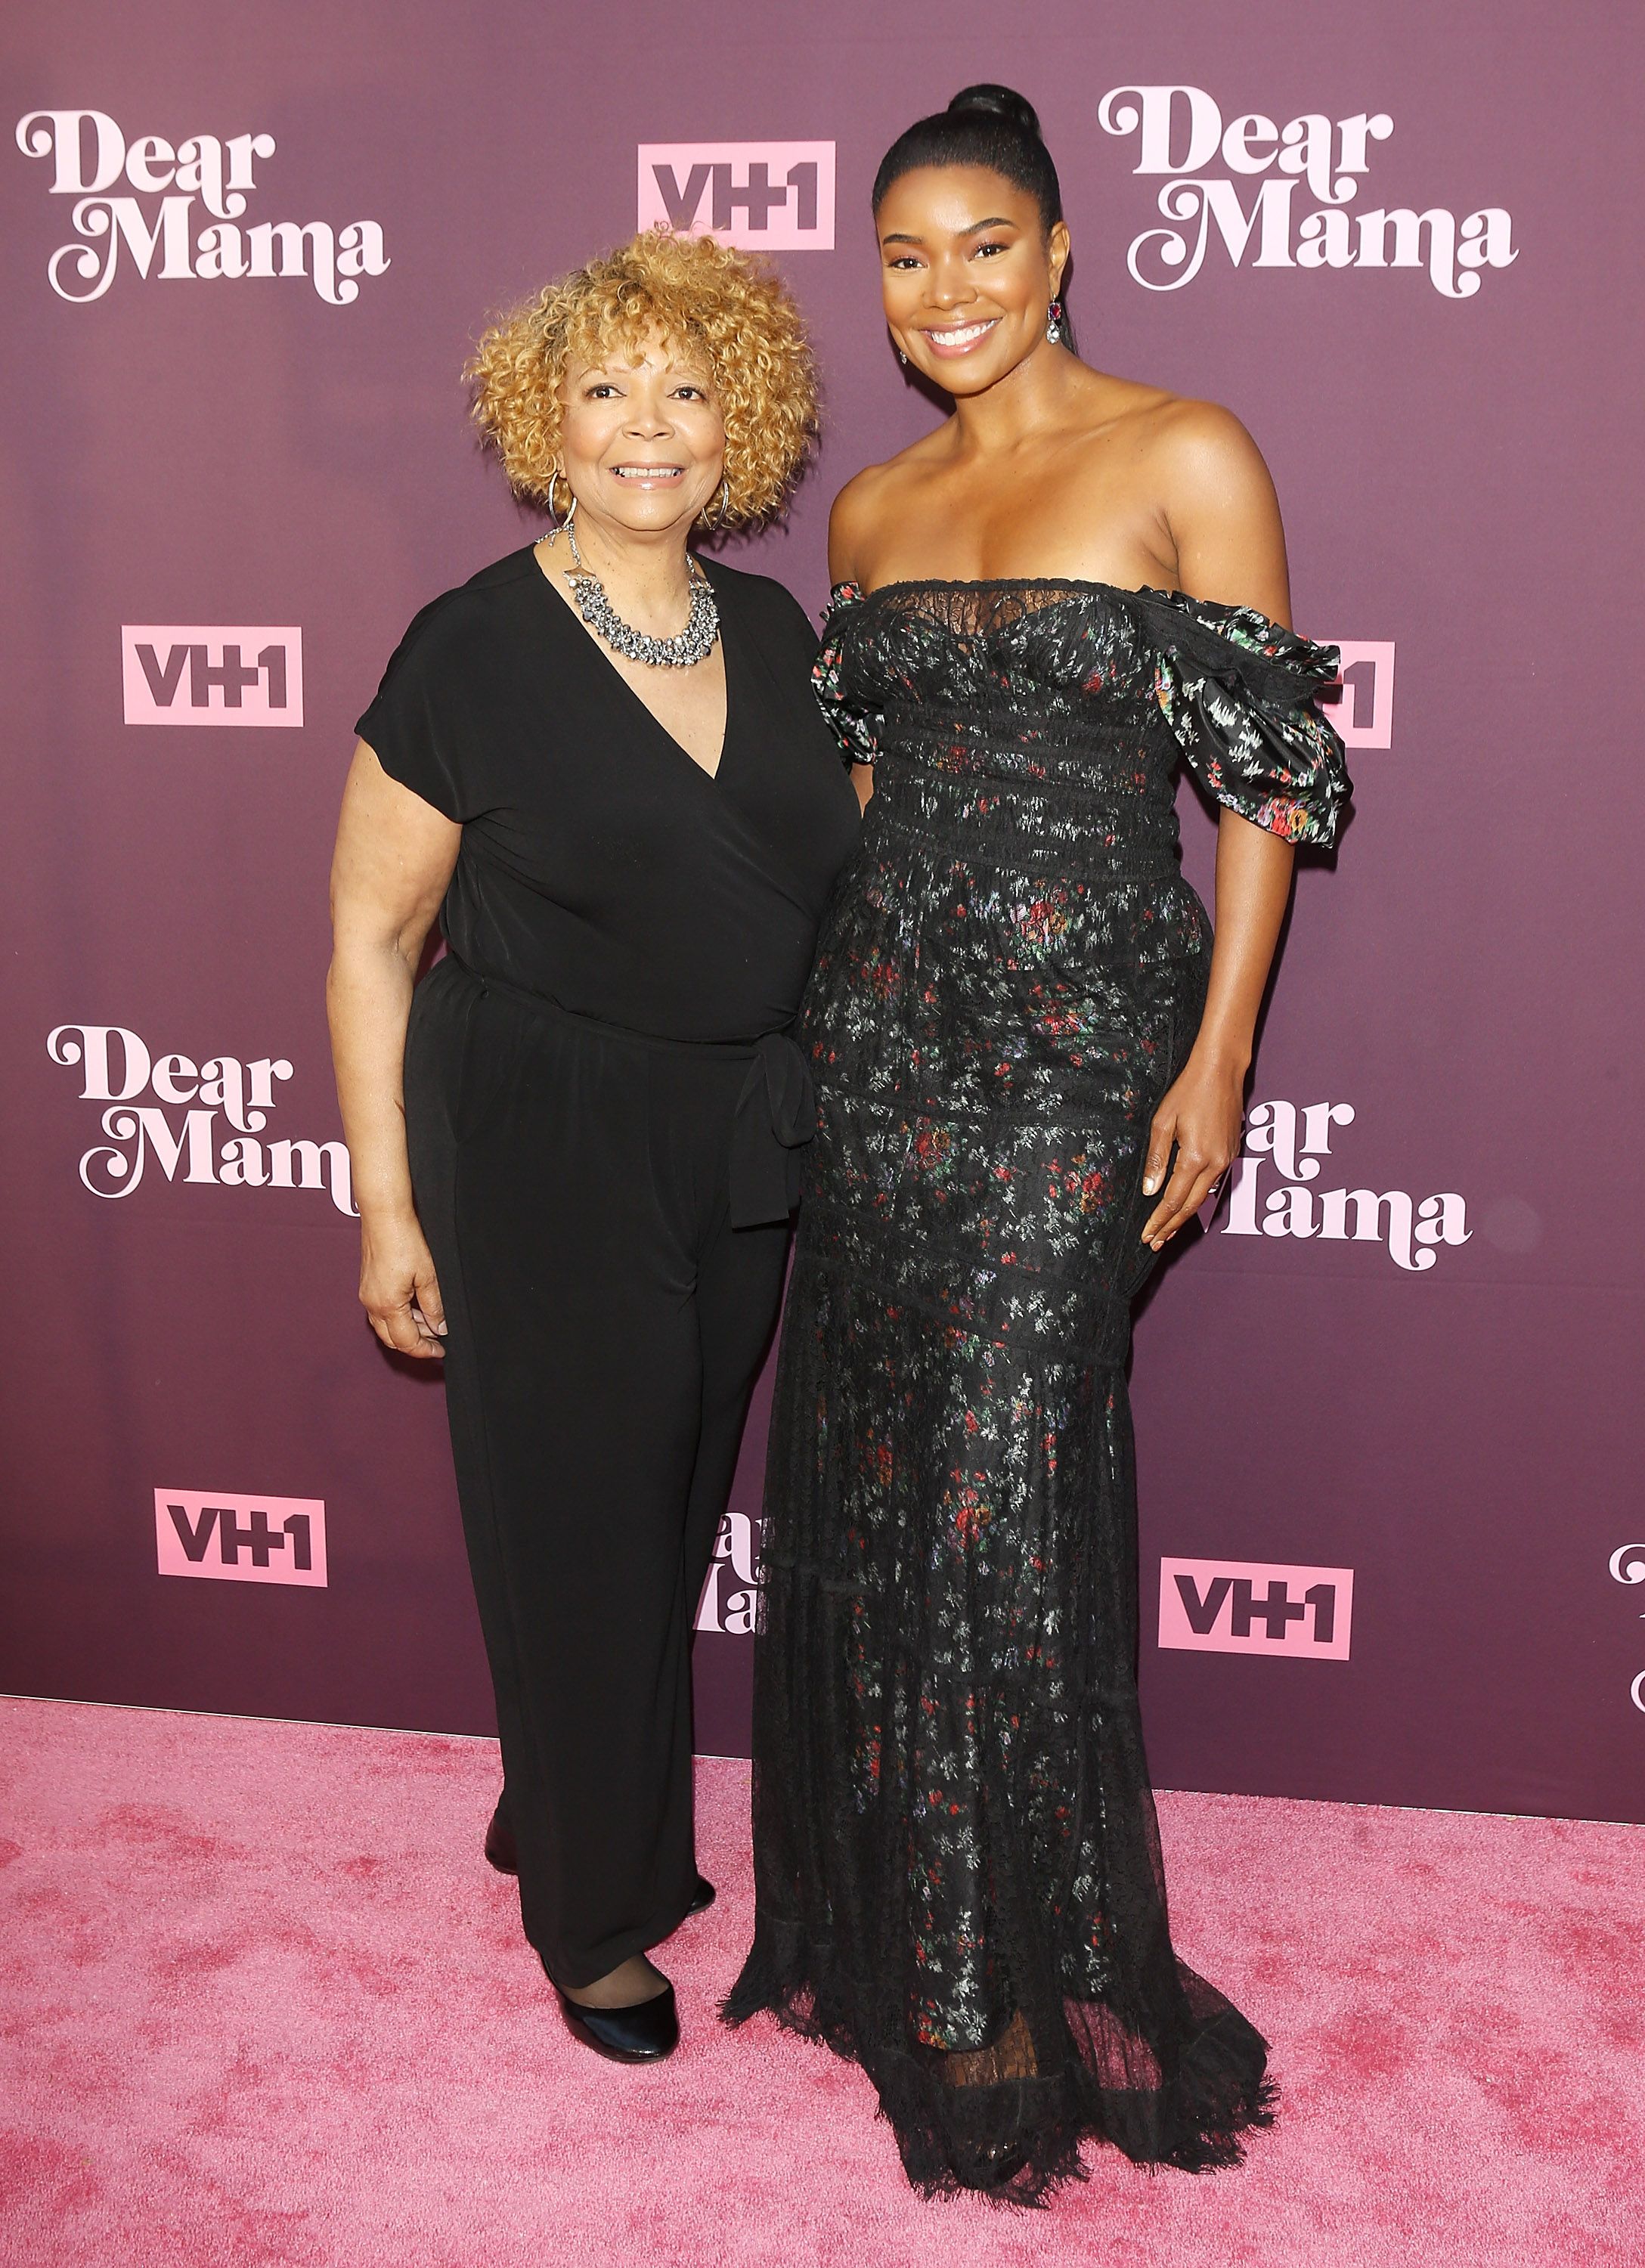  Gabrielle Union and her mother Theresa Union at VH1's 3rd Annual "Dear Mama: A Love Letter To Moms" in 2018 | Source: Getty Images